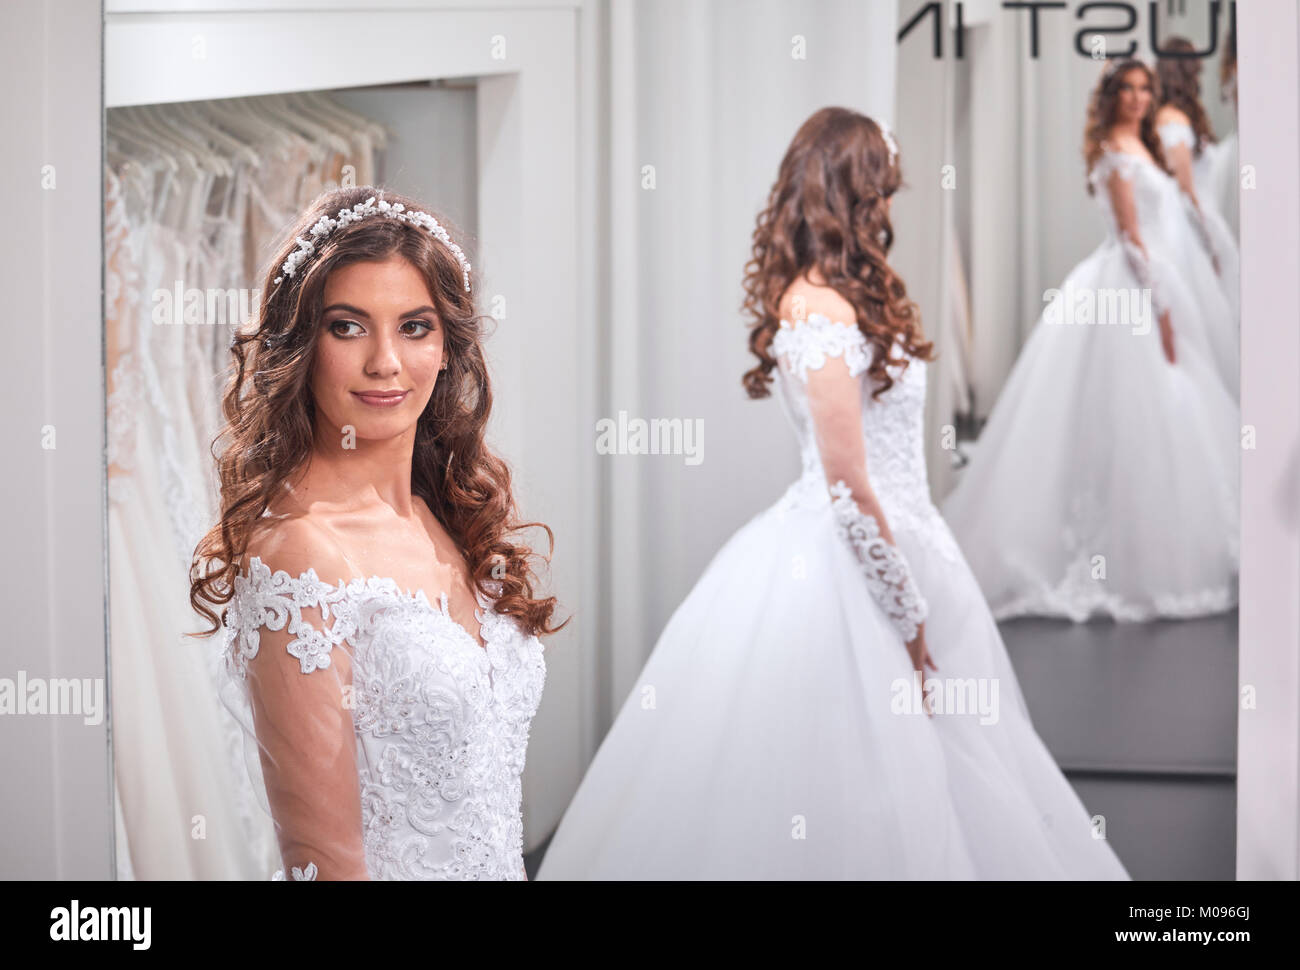 one young bride, looking at self, wearing gown, in mirror image back, front view, bridal salon. Stock Photo